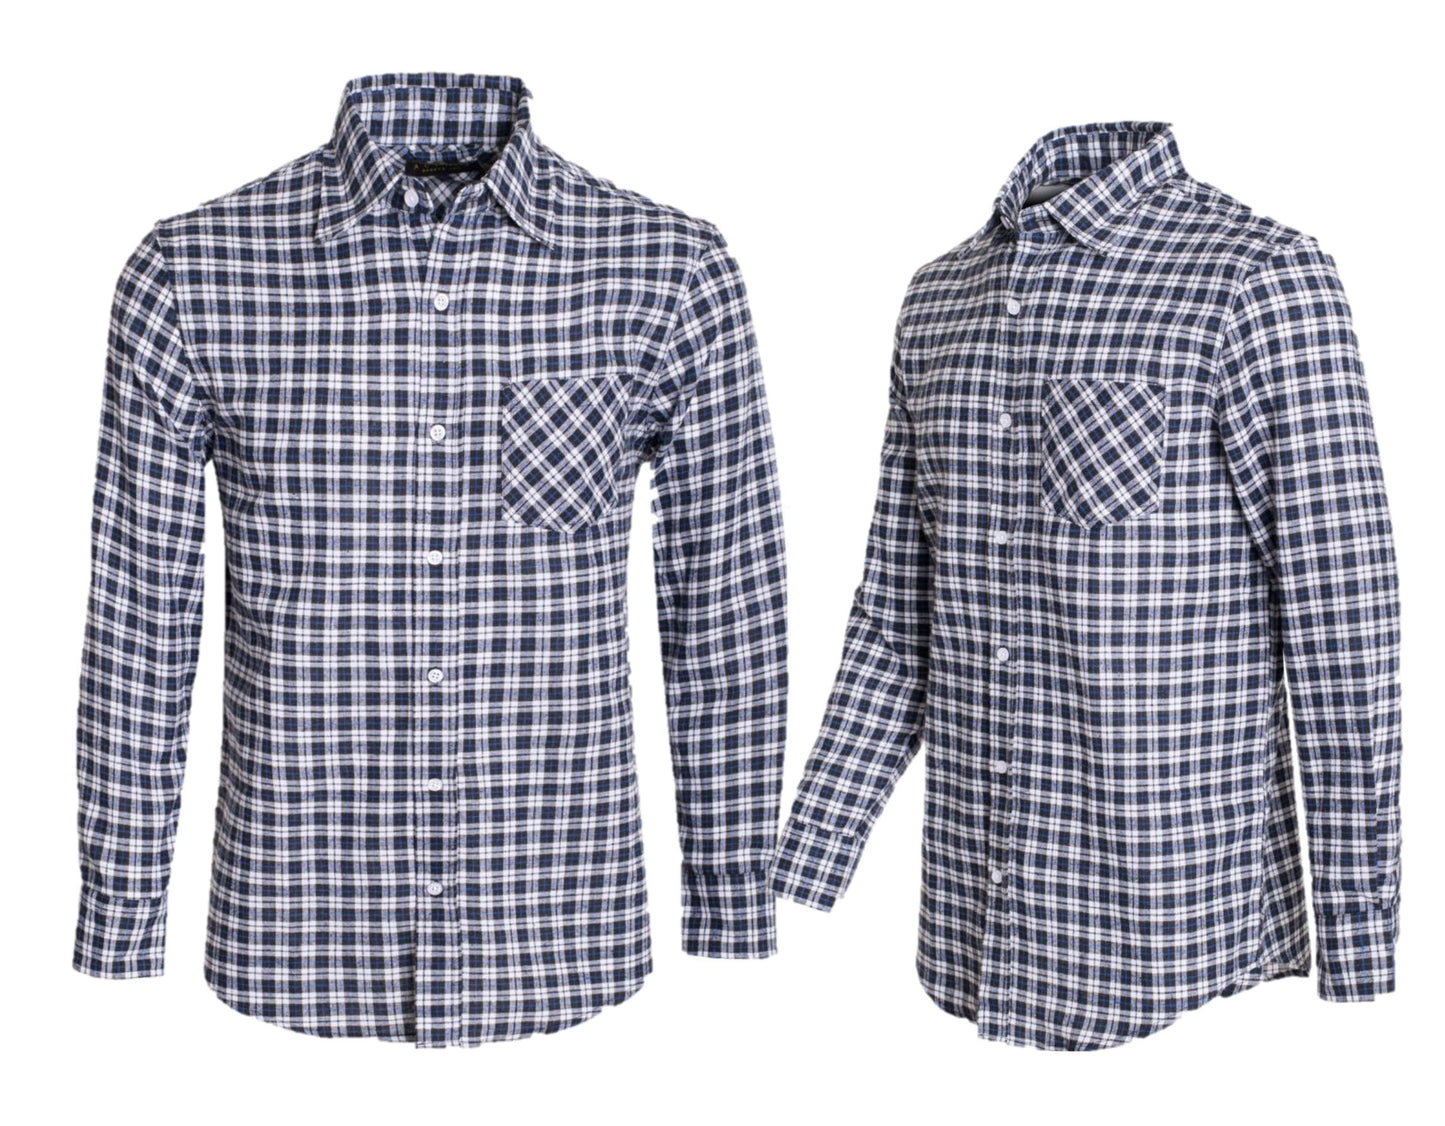 Men's Flannel Shirt Button Down Long Sleeve Model 368 453 480 by ACTIVA